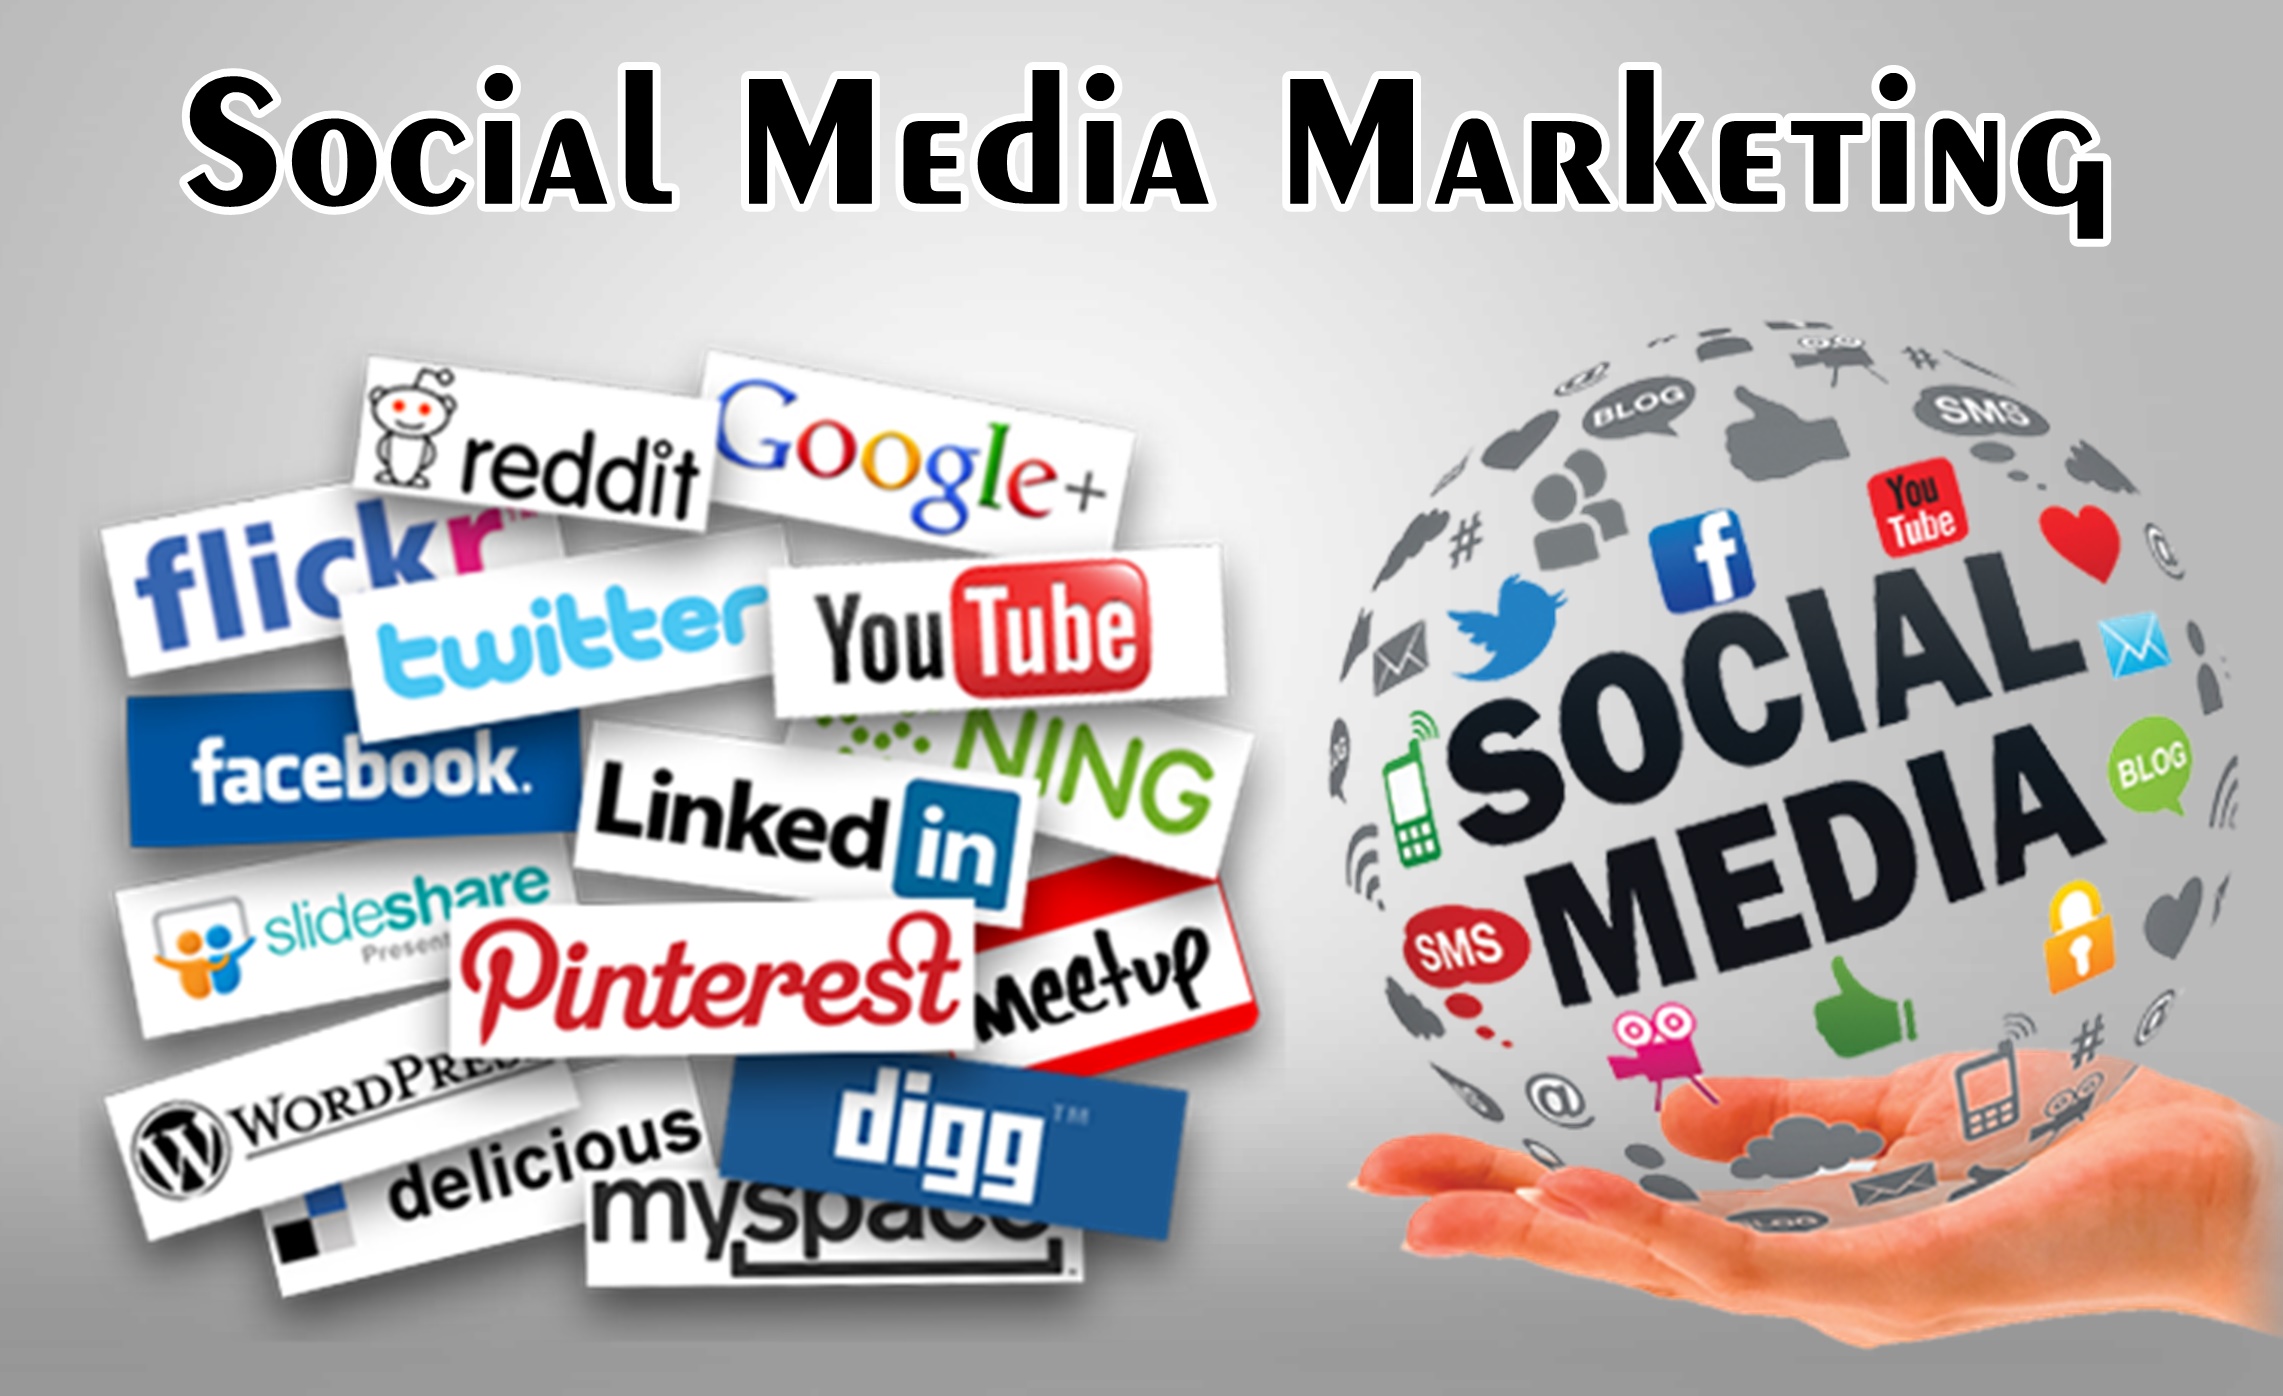 social media marketing - learn how to make content and earn money